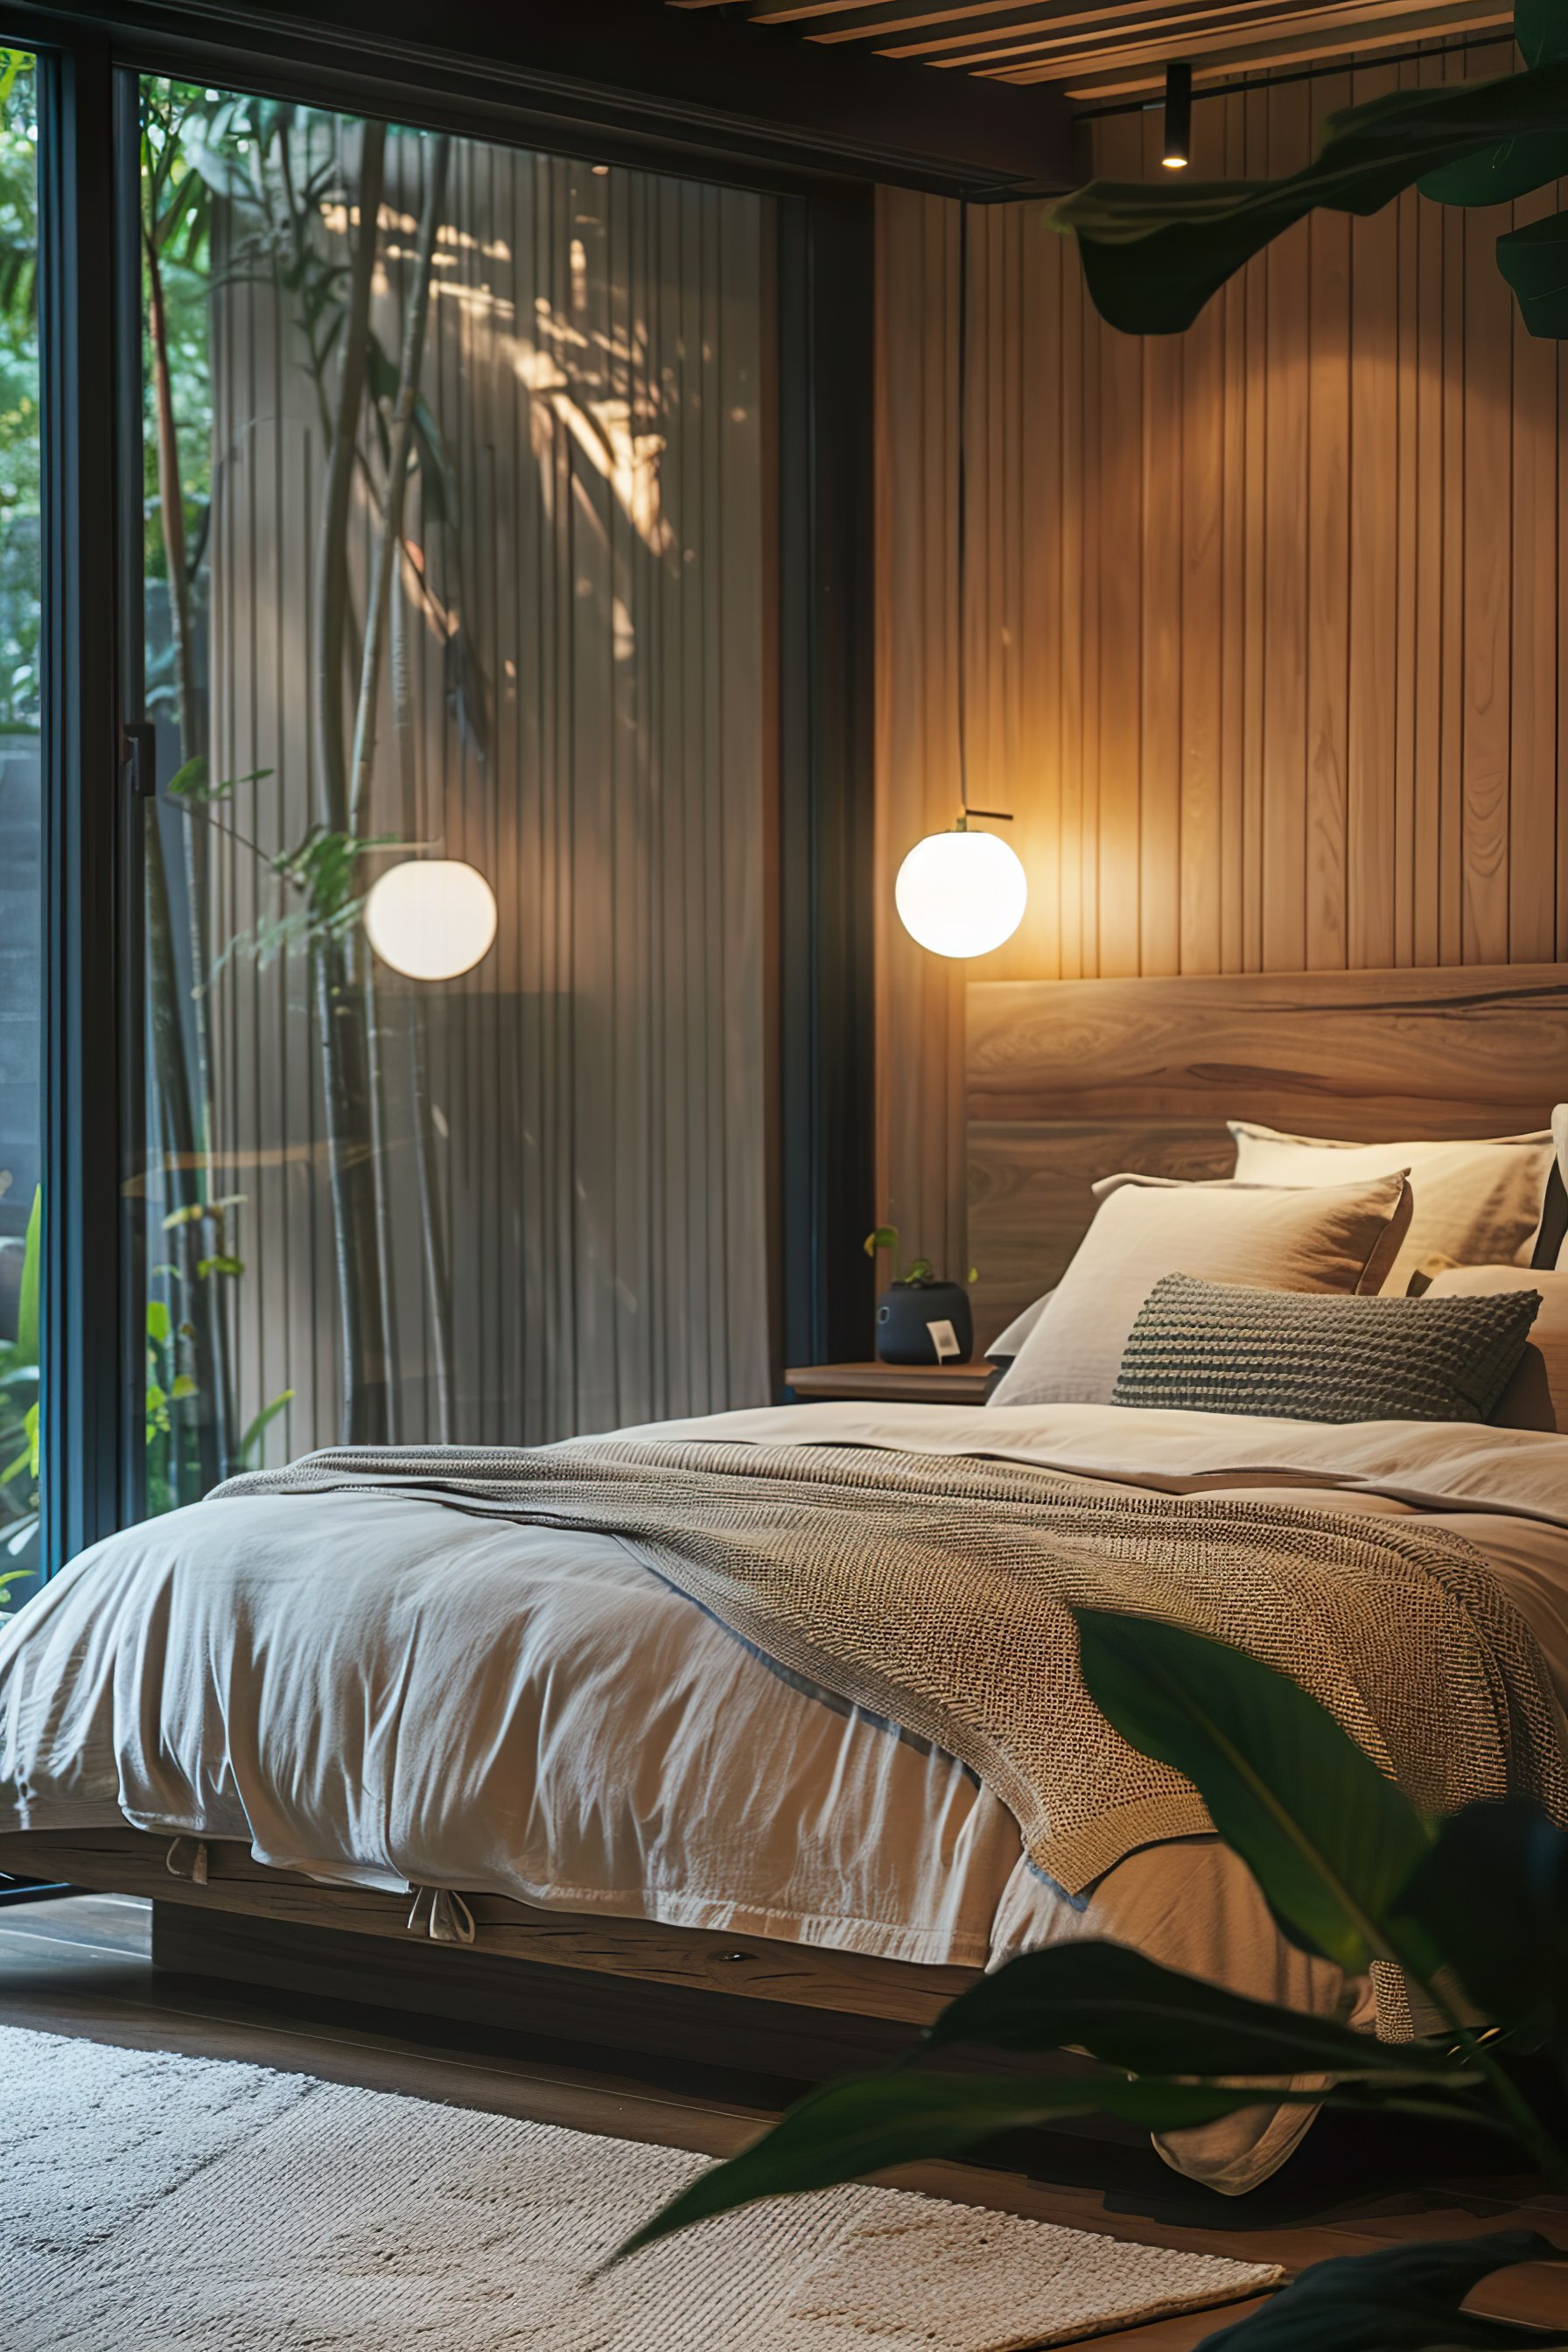 Cozy modern bedroom with wooden paneling, hanging round lights, and plants beside a large window with drawn curtains.